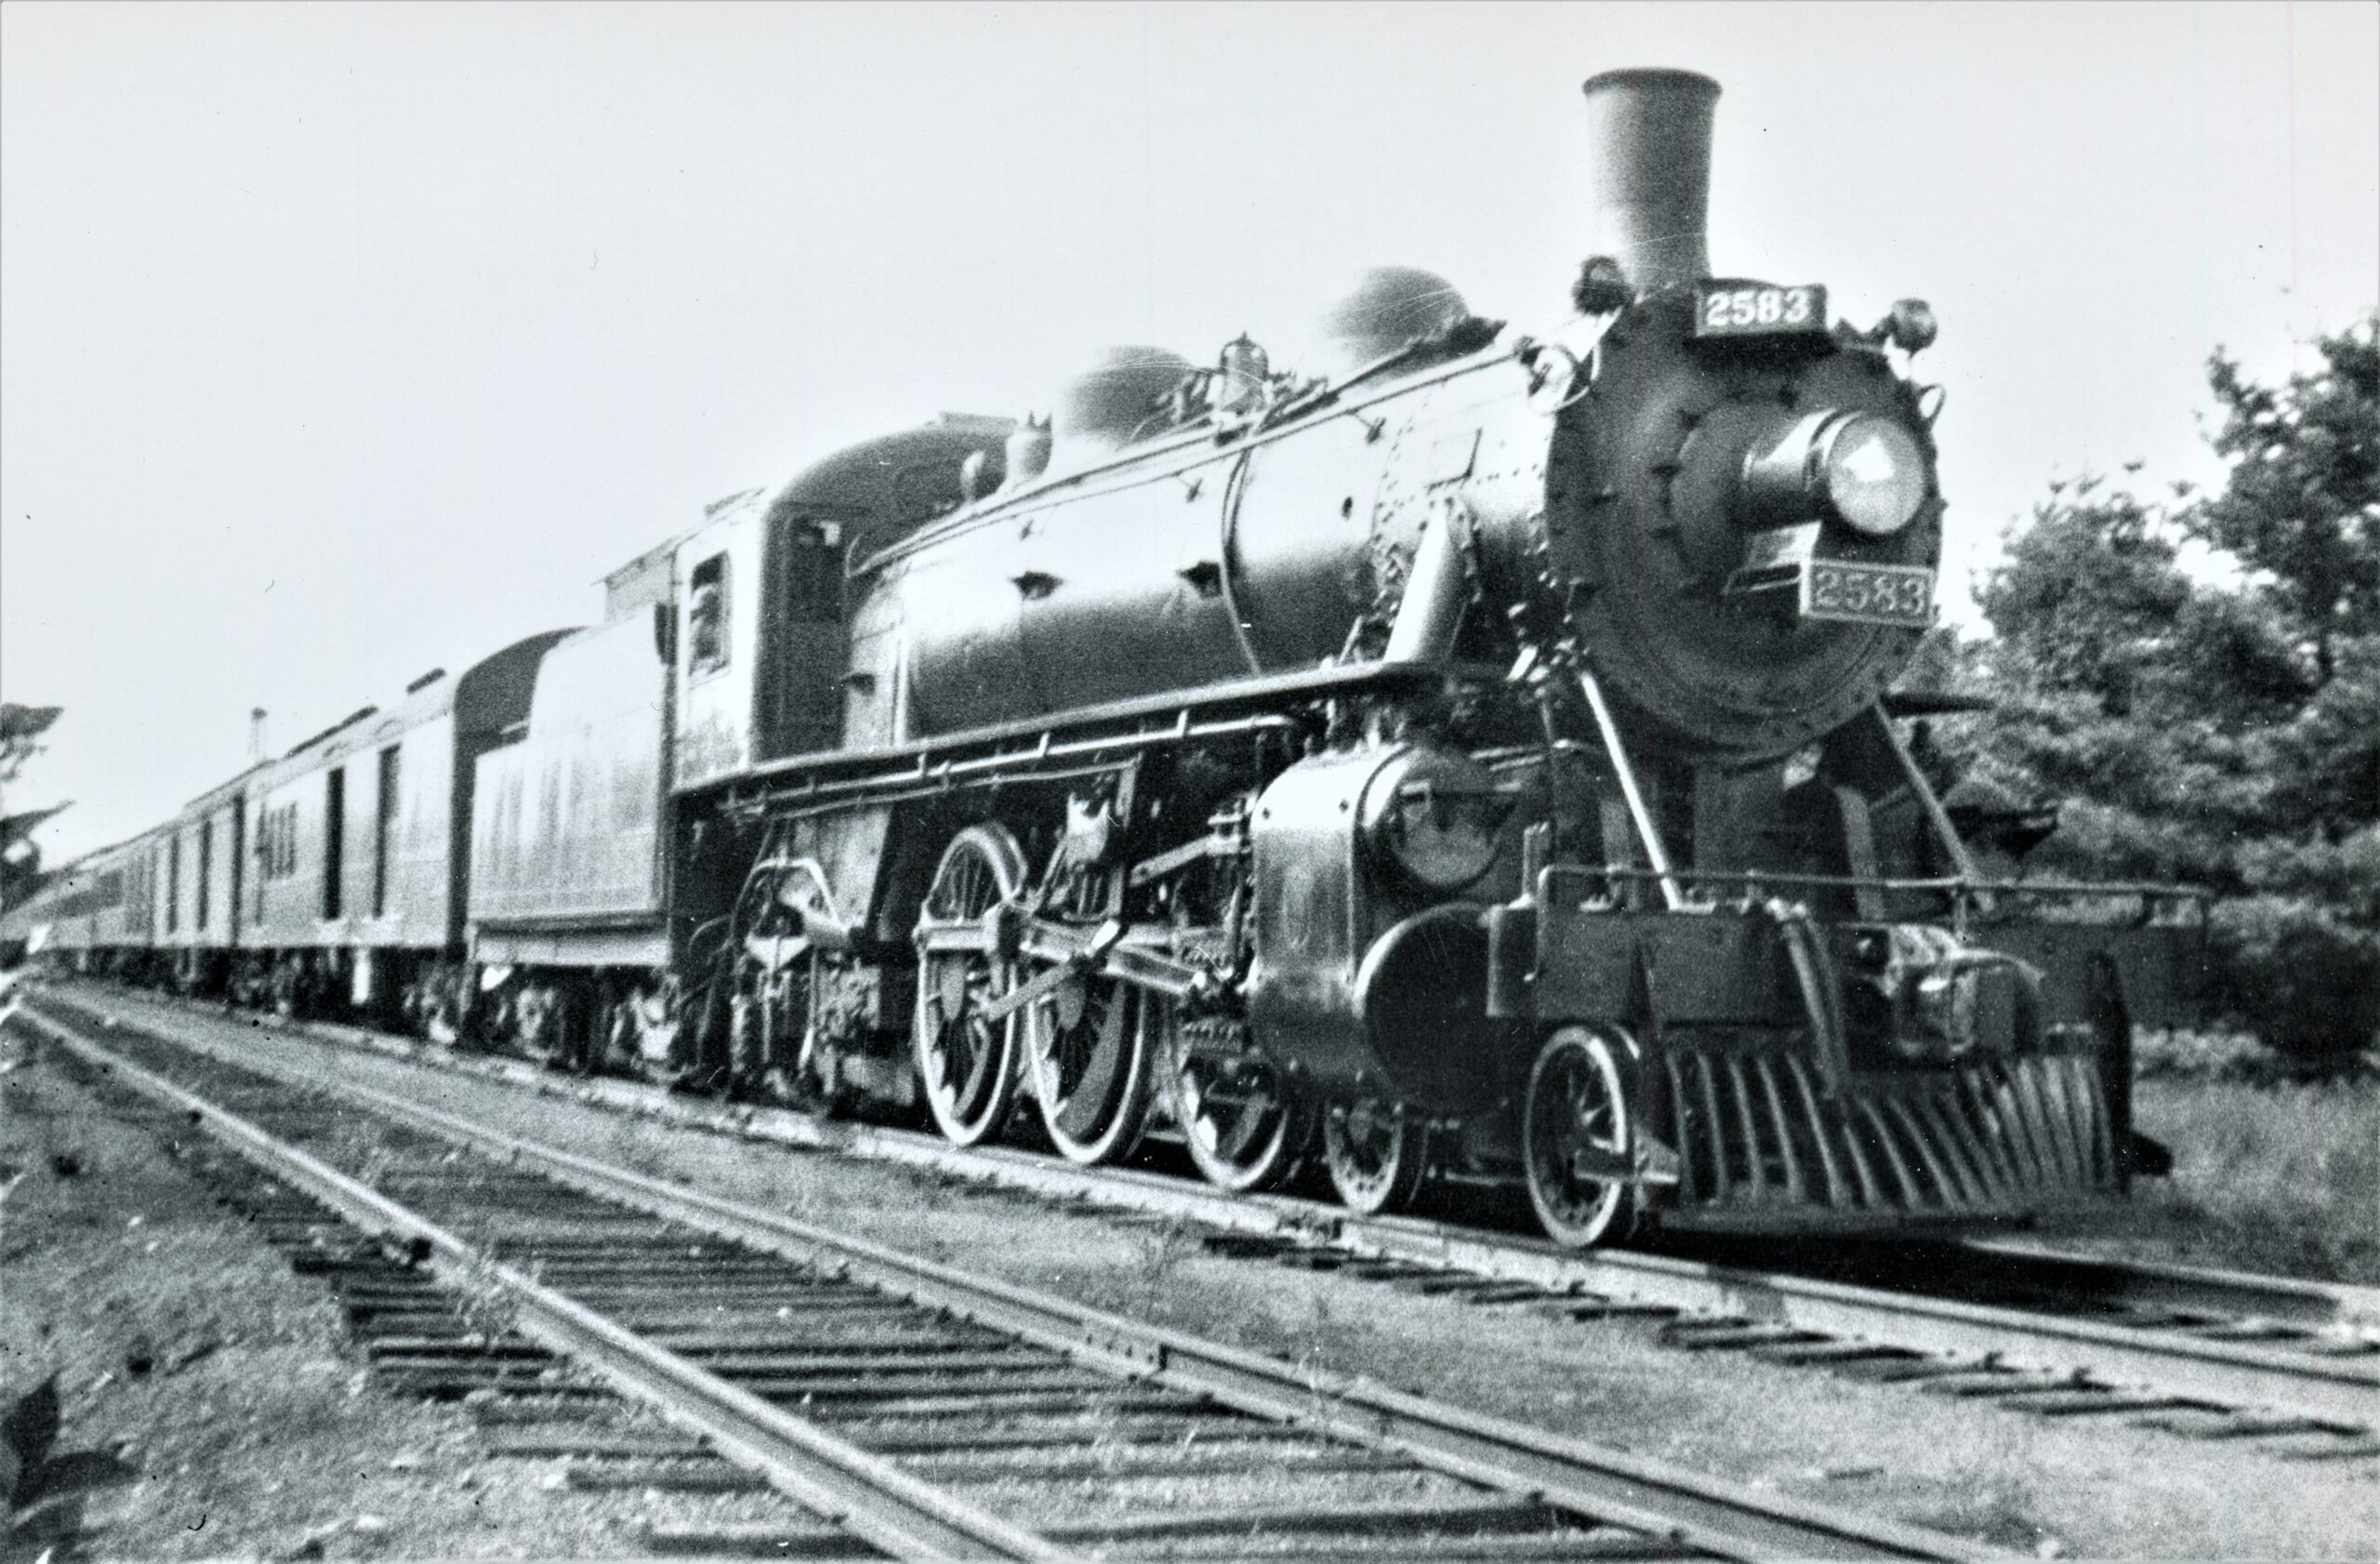 Canadian Pacific | Ashland, New Hampshire | Pacific 4-6-2 G-2s 2583 | Passenger train with mail cars | August 4, 1934